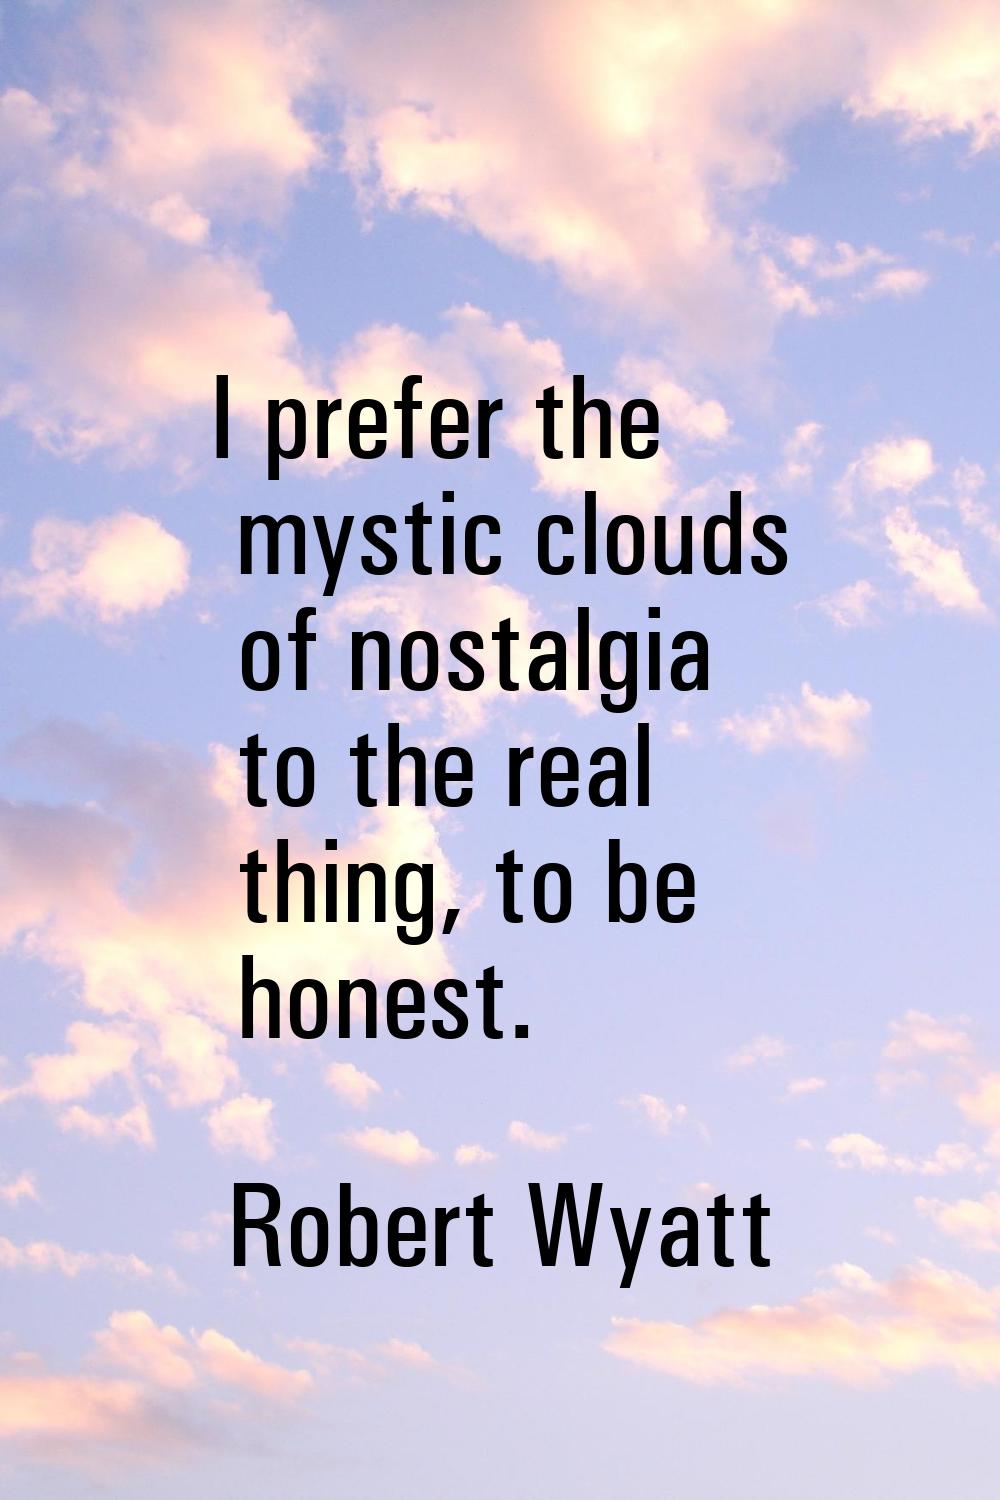 I prefer the mystic clouds of nostalgia to the real thing, to be honest.